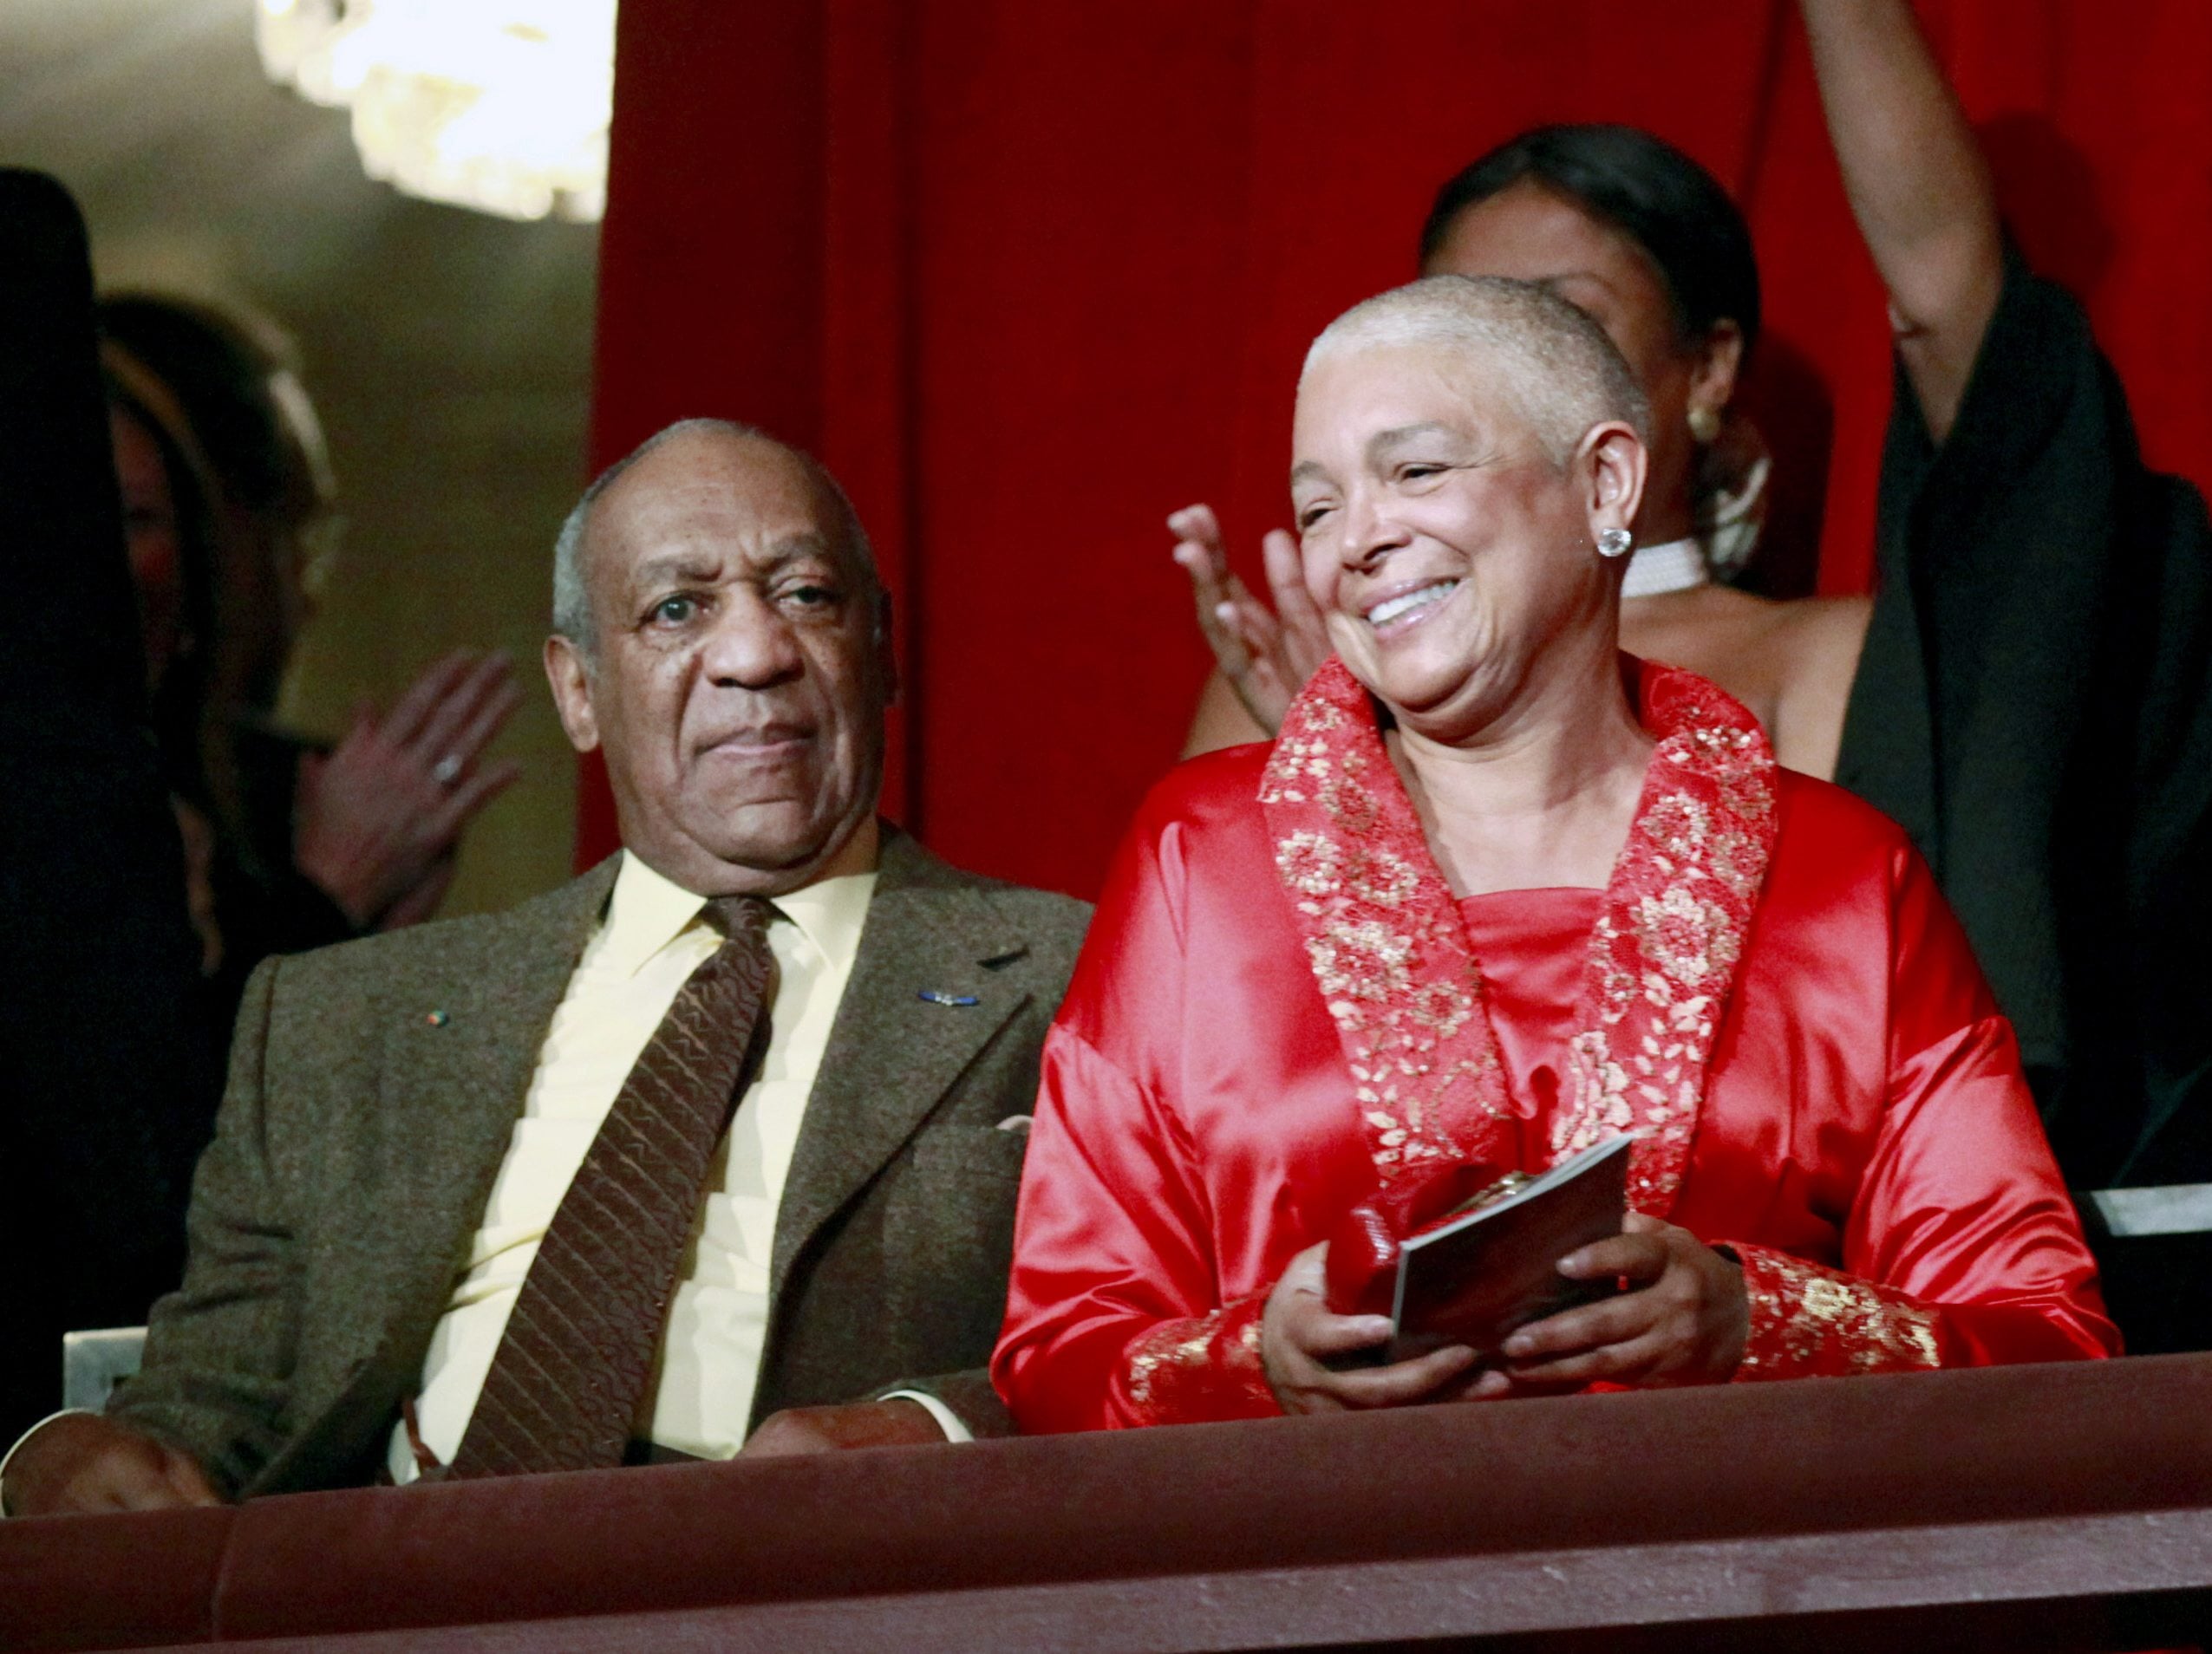 Comedian Bill Cosby, left, and his wife Camille appear at the John F. Kennedy Center for Performing Arts in 2009 before Bill Cosby received the Mark Twain Prize for American Humor in Washington.